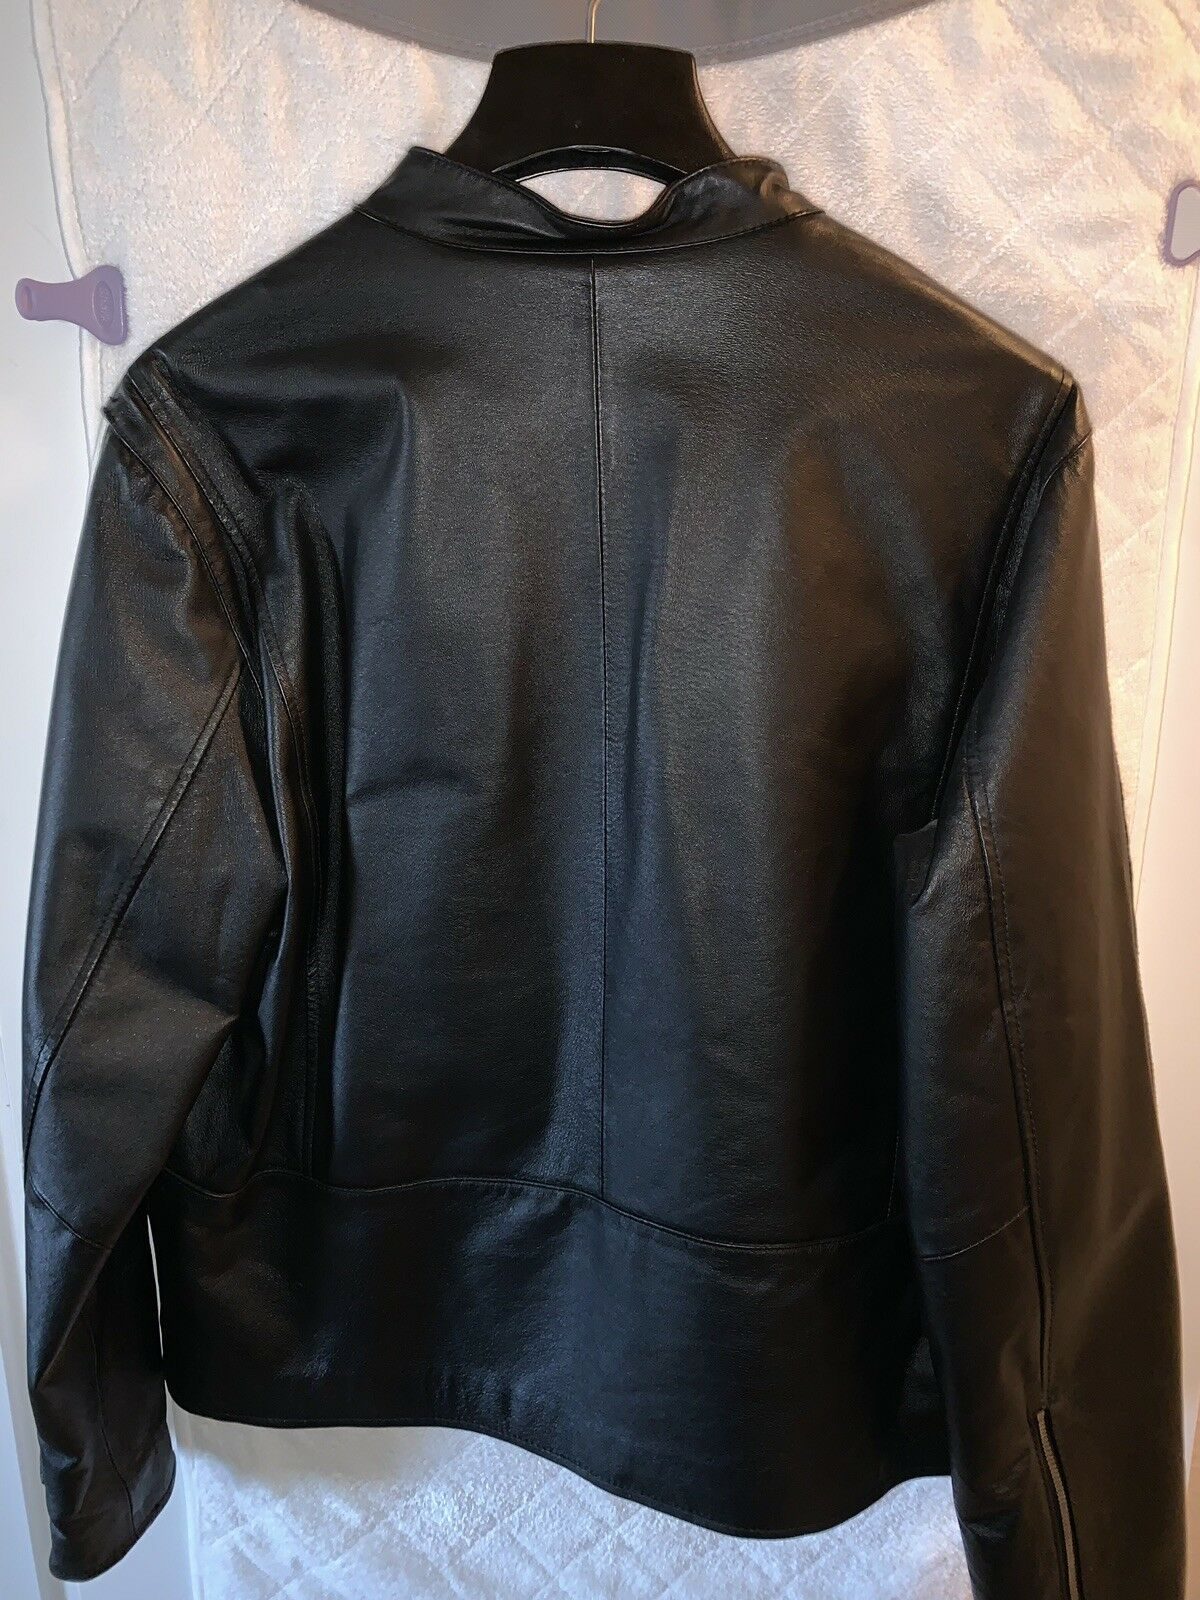 Street Legal Leather Jacket - Right Jackets